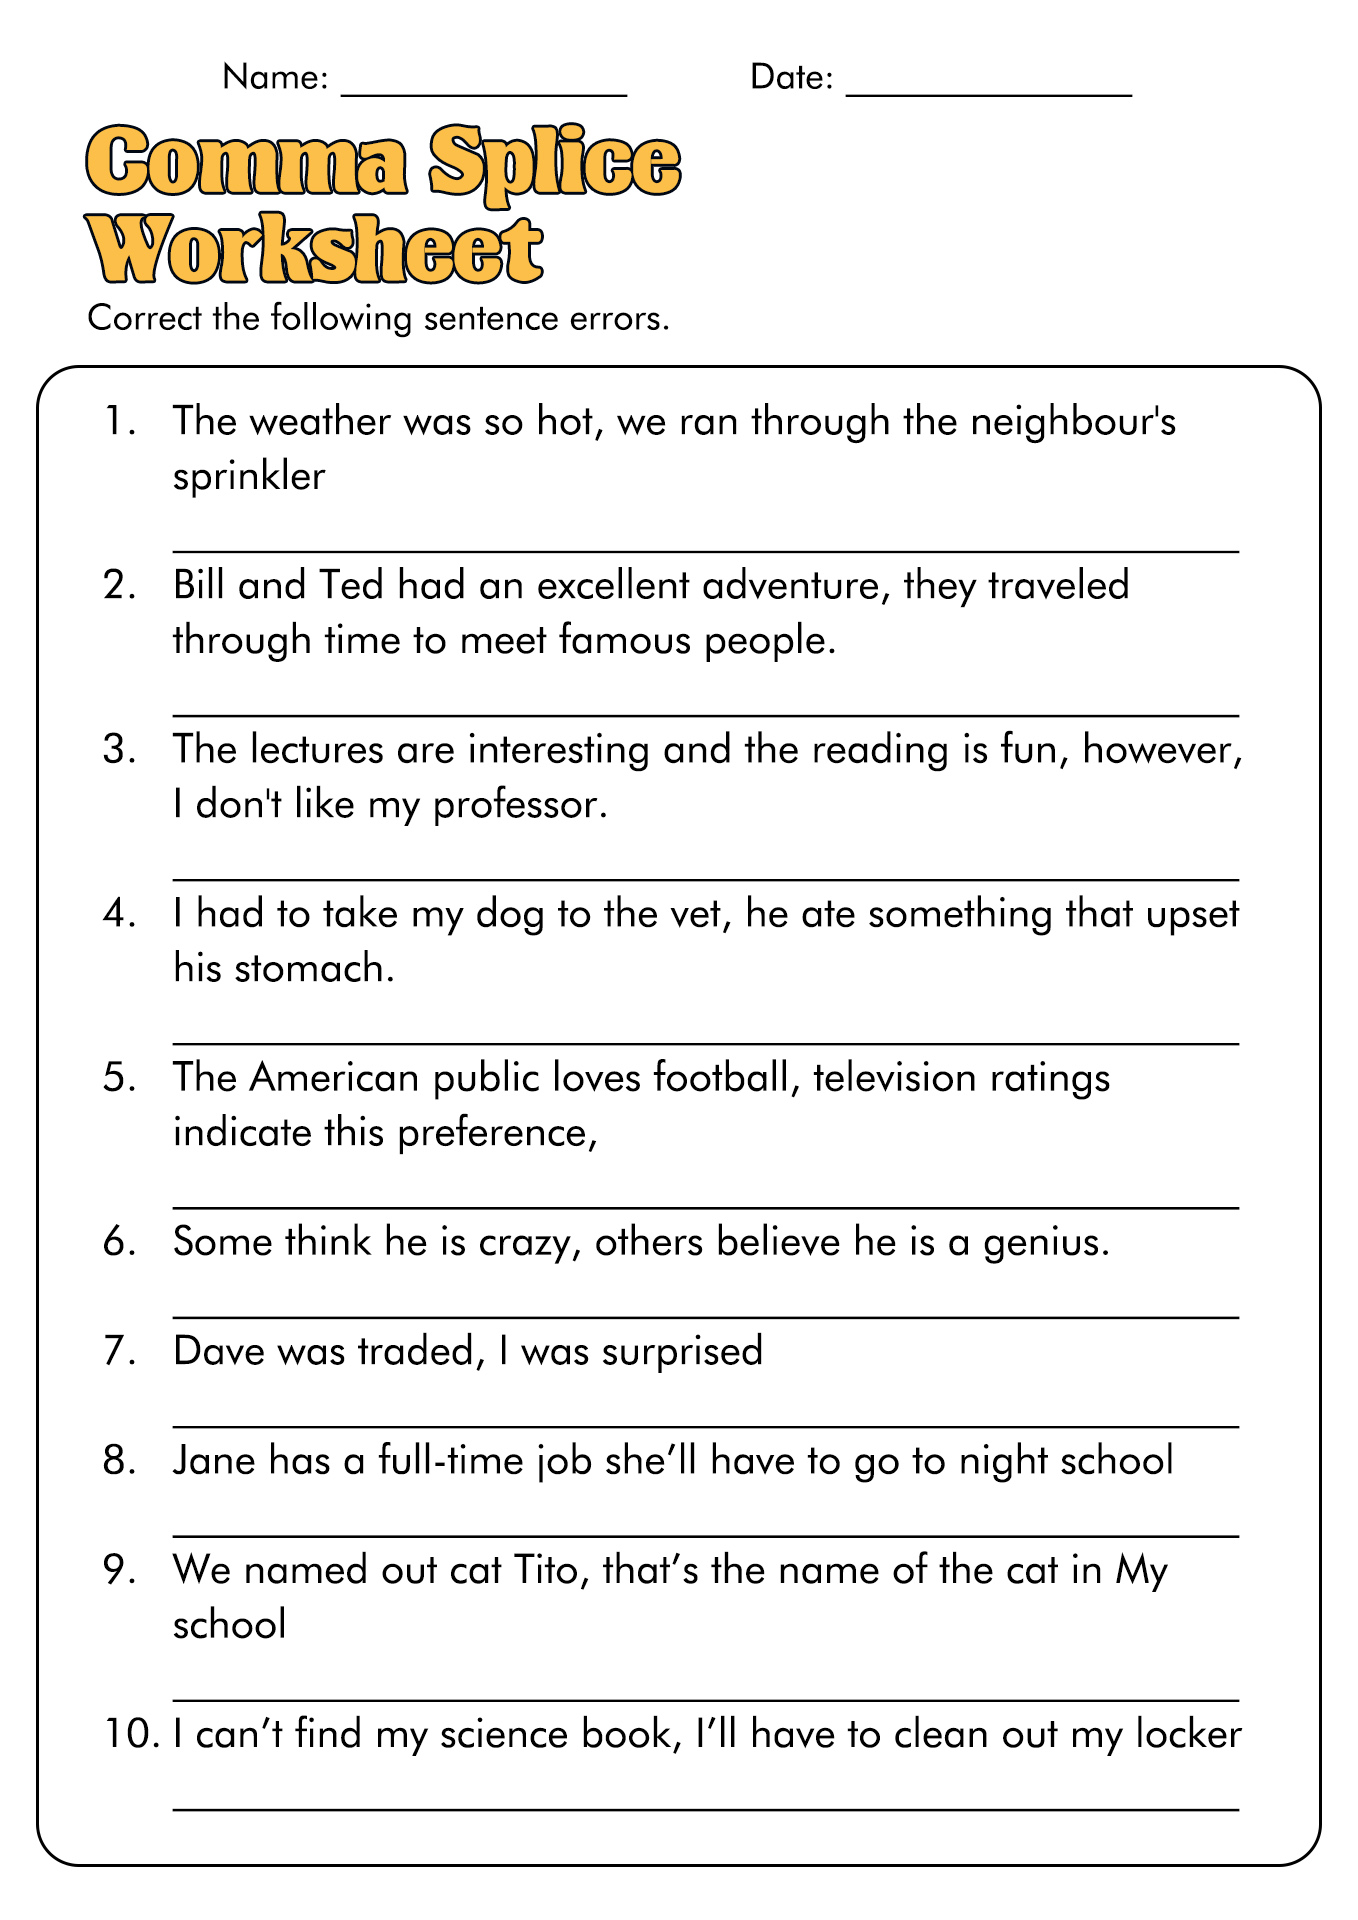 Comma Splice Practice Worksheet Answers Image